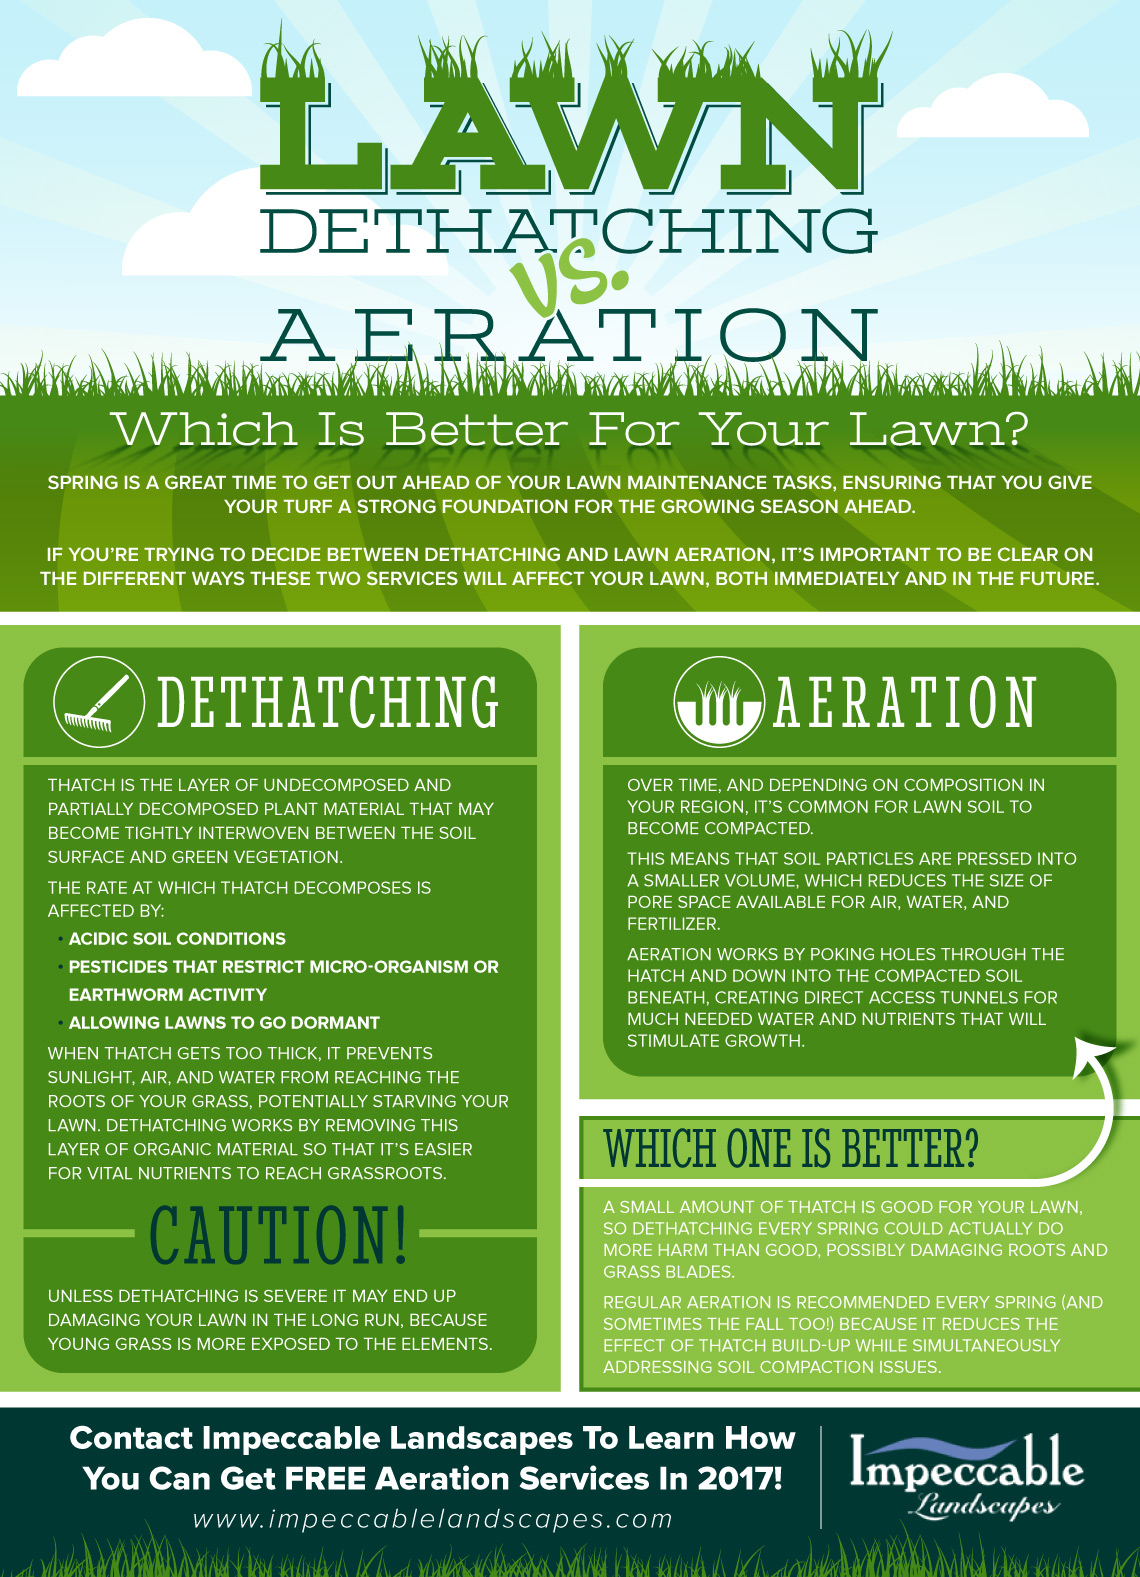 Dethatching vs lawn aeration inforgraphic from Impeccable Landscapes.